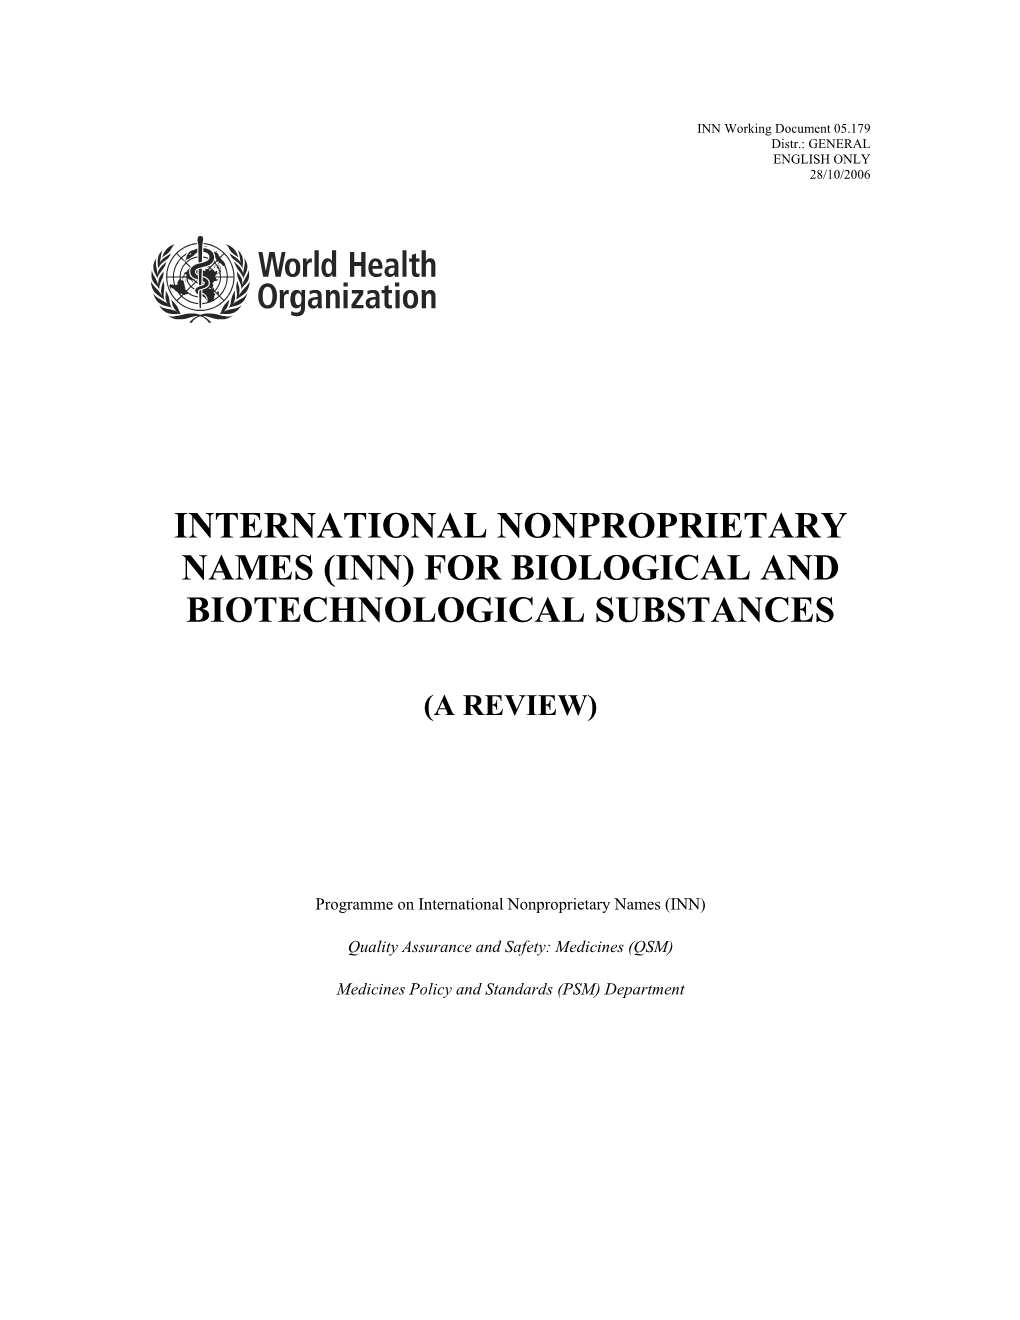 International Nonproprietary Names (Inn) for Biological and Biotechnological Substances